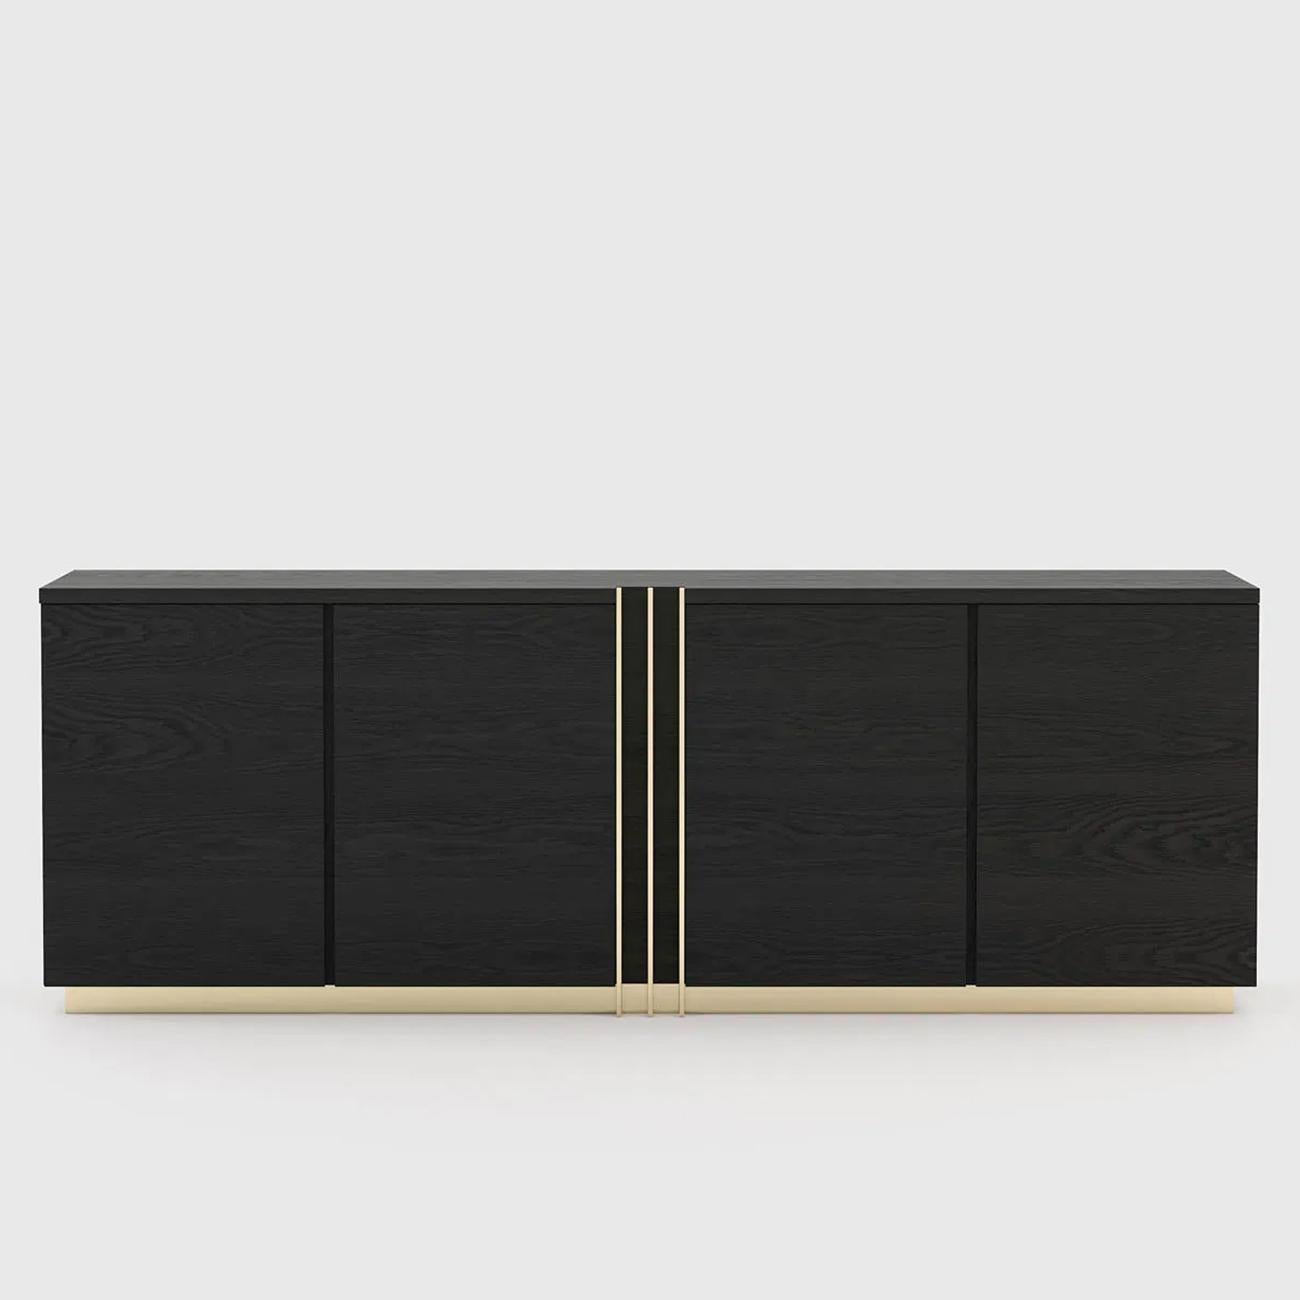 Sideboard Clark black ash with structure in ash wood
in blackened matte finish. with polished stainless steel
trims in gold finish, sideboard with 4 doors with shelves
inside. Also available in other finishes on request.